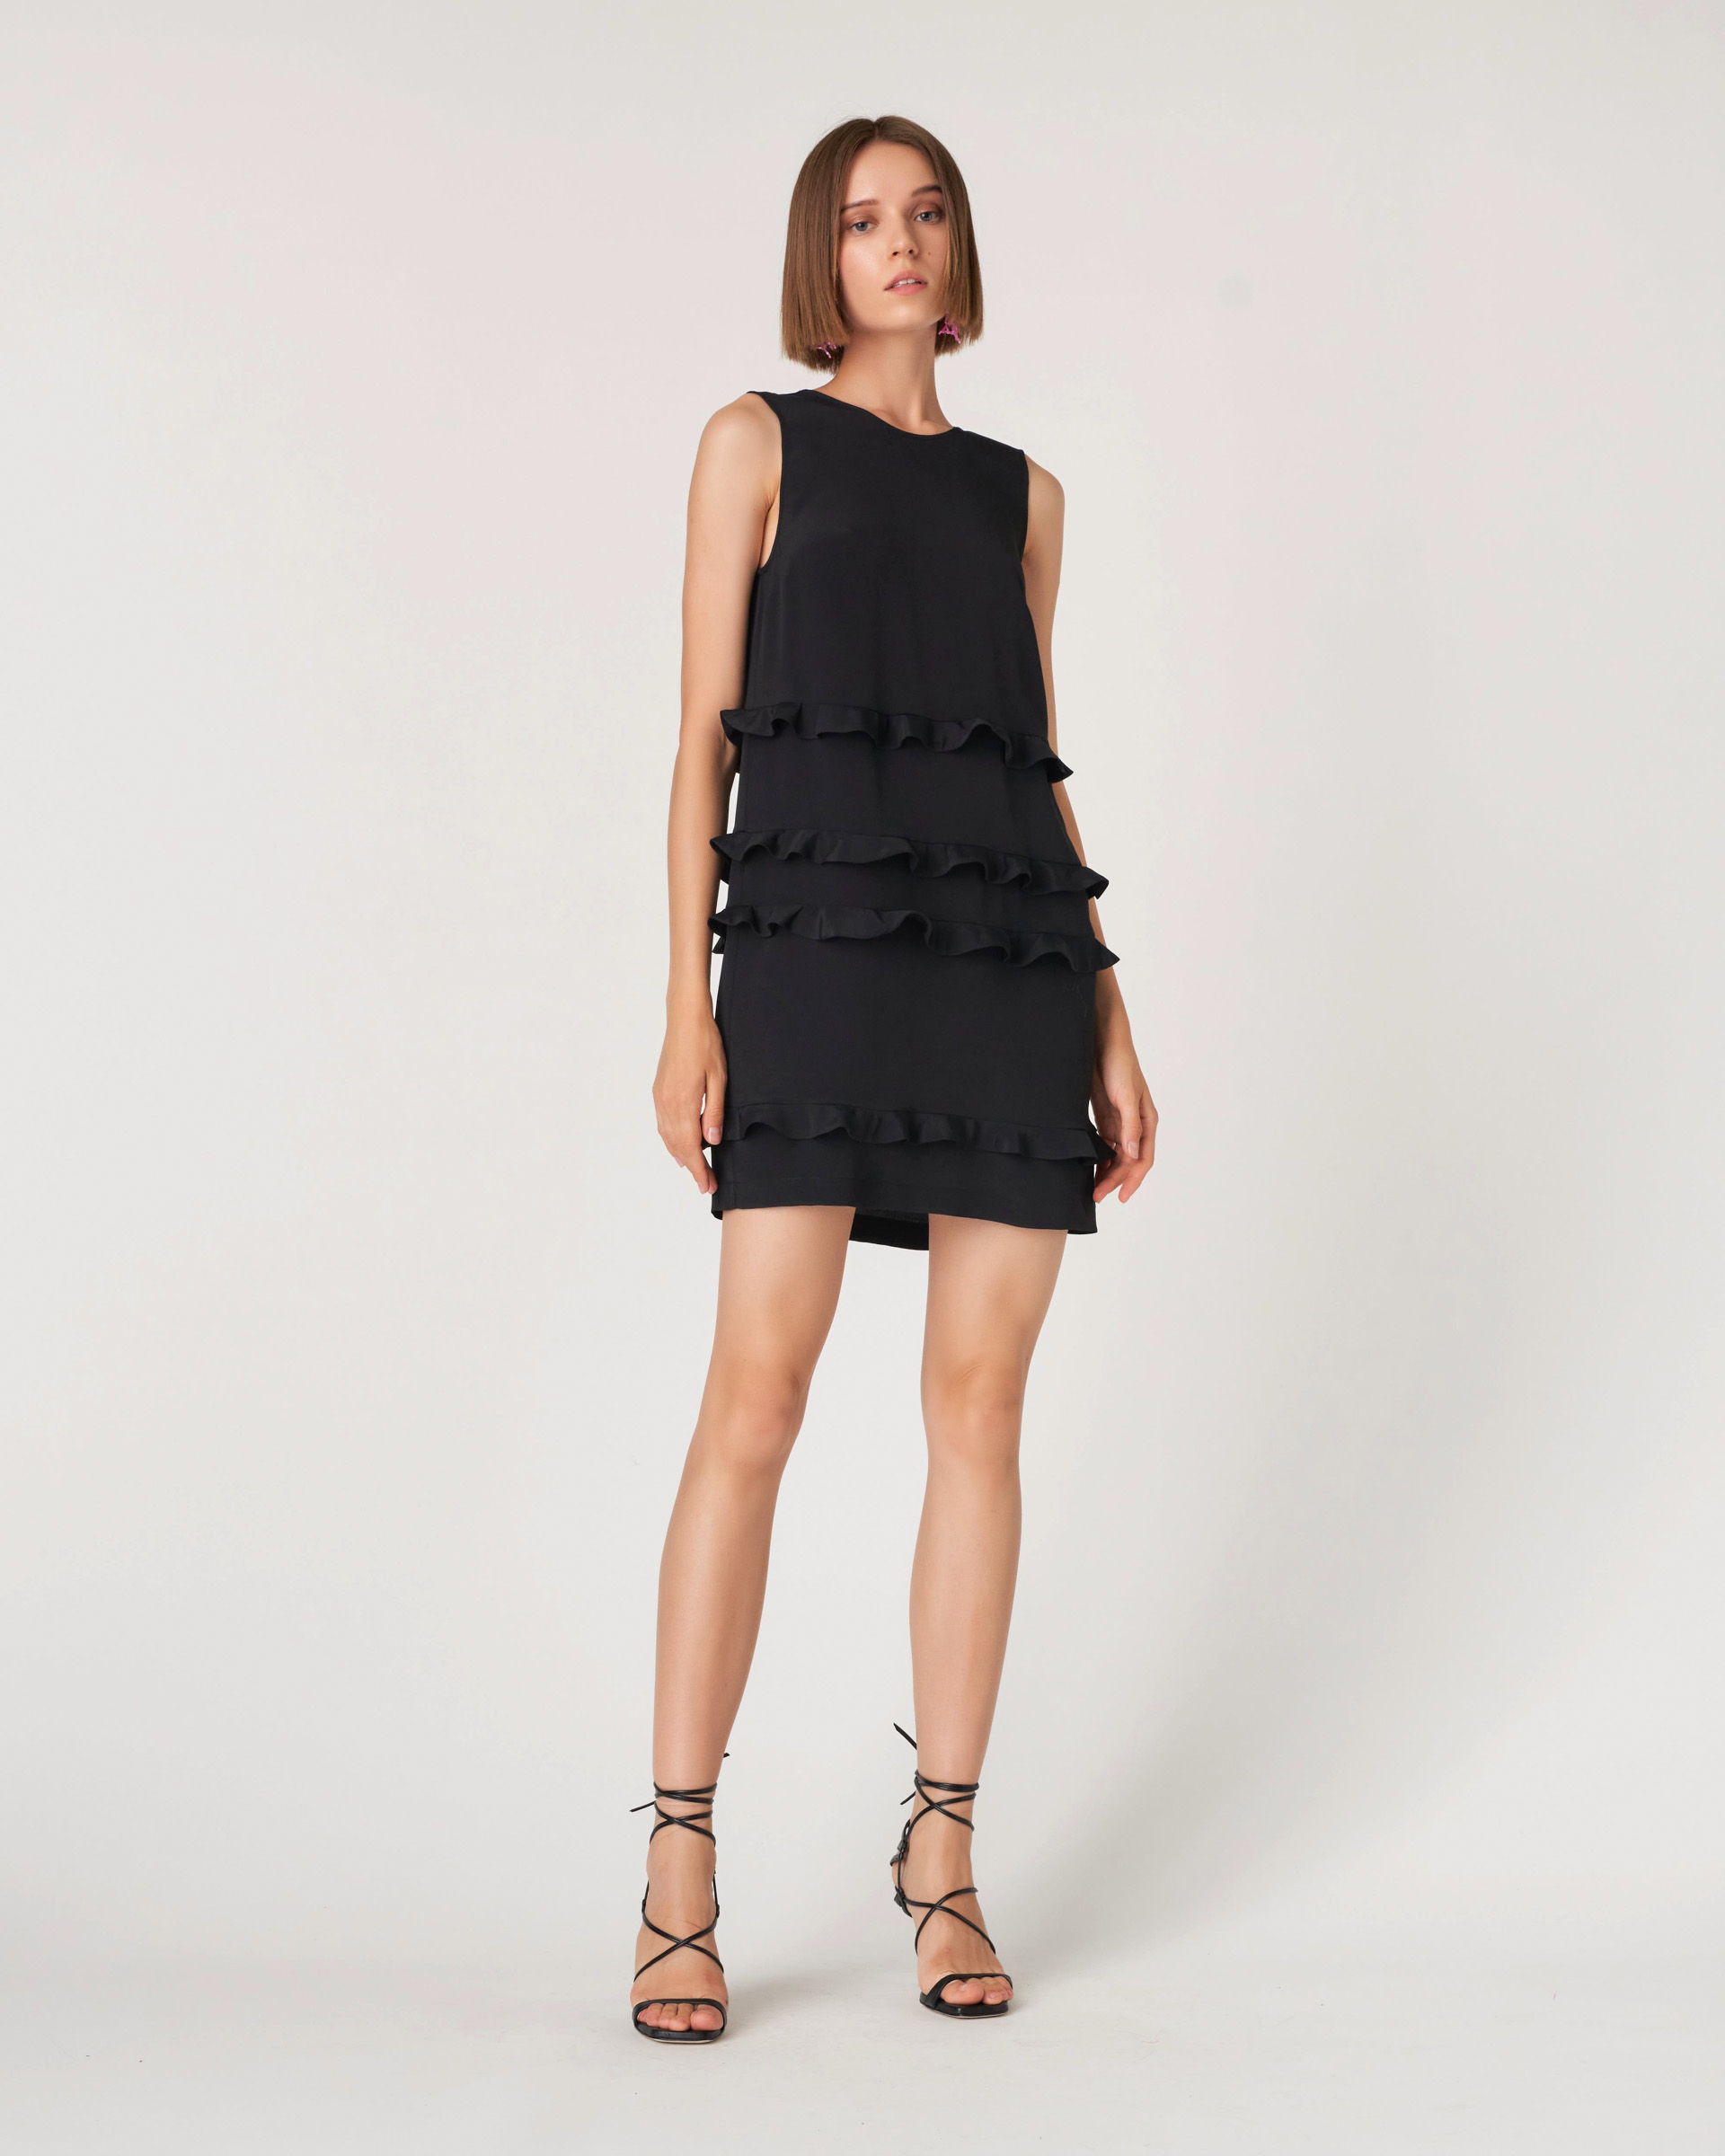 The Market Store | Little Black Dress With Ruffles